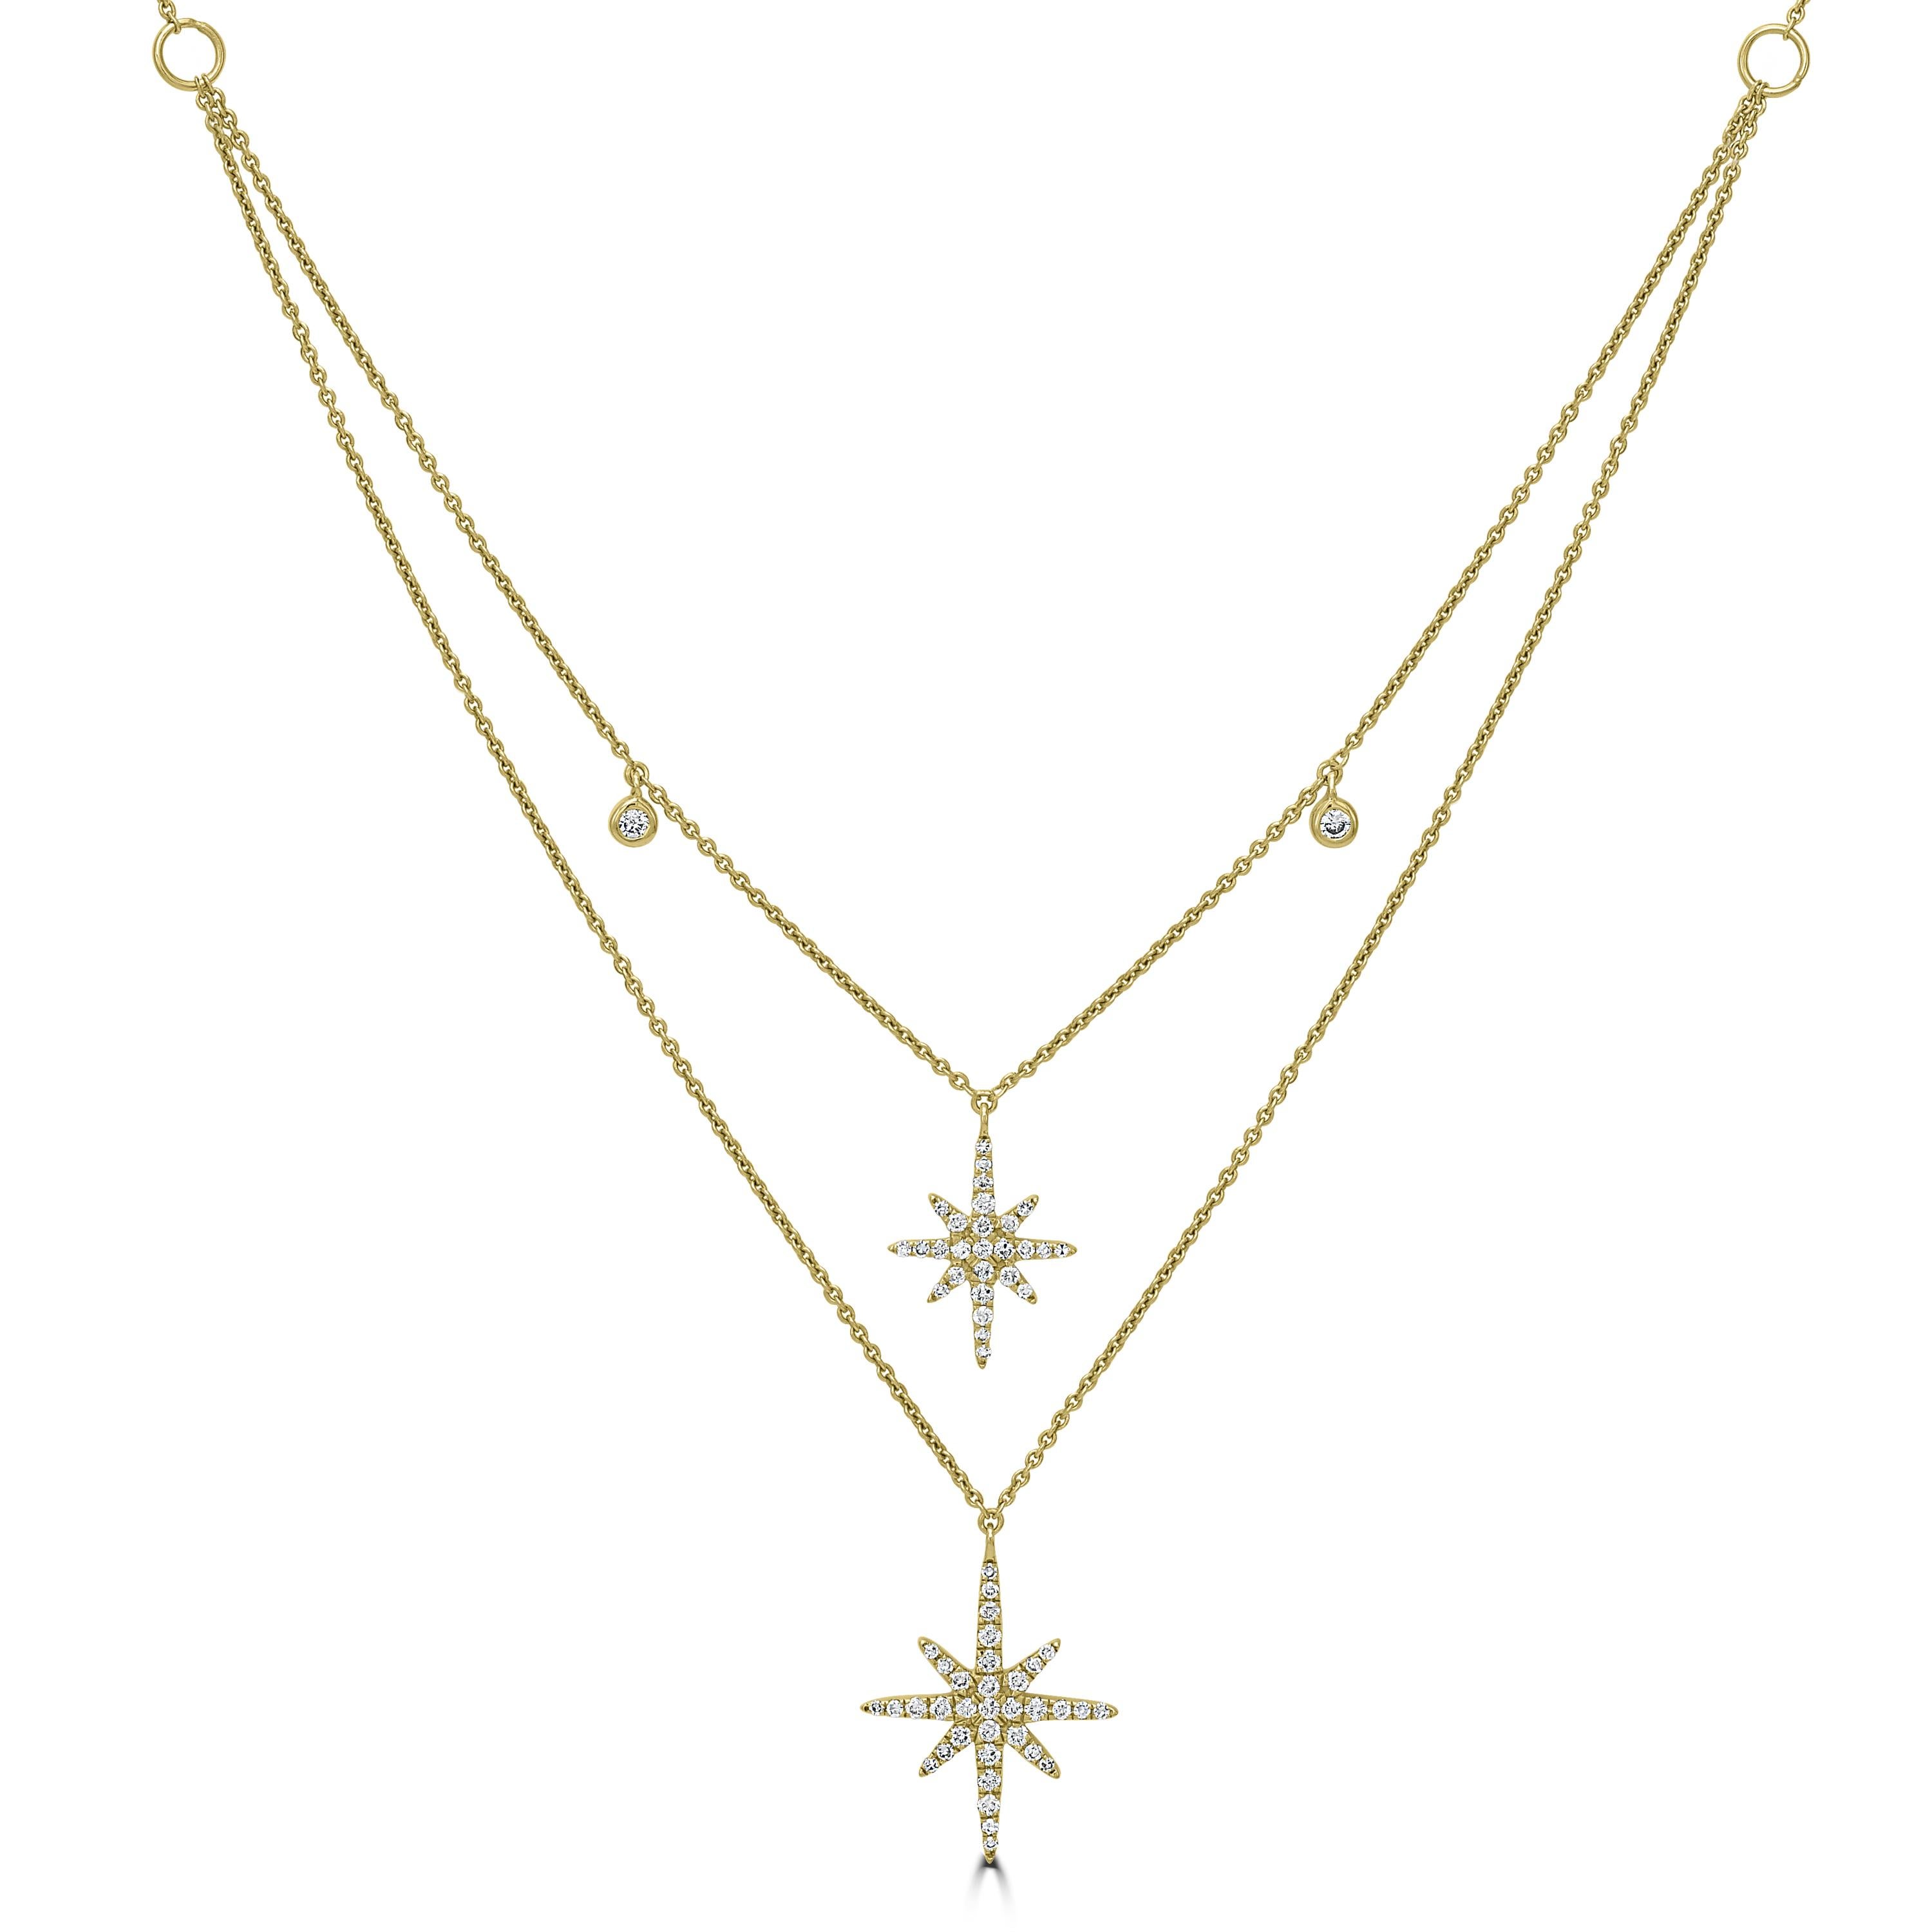 Take your wardrobe to new heights with this Luxle dazzling diamond double strand starburst necklace. This necklace contains starburst motifs set with 0.34 Ct round full-cut diamonds and gracefully falls down your throat. This double strand necklace